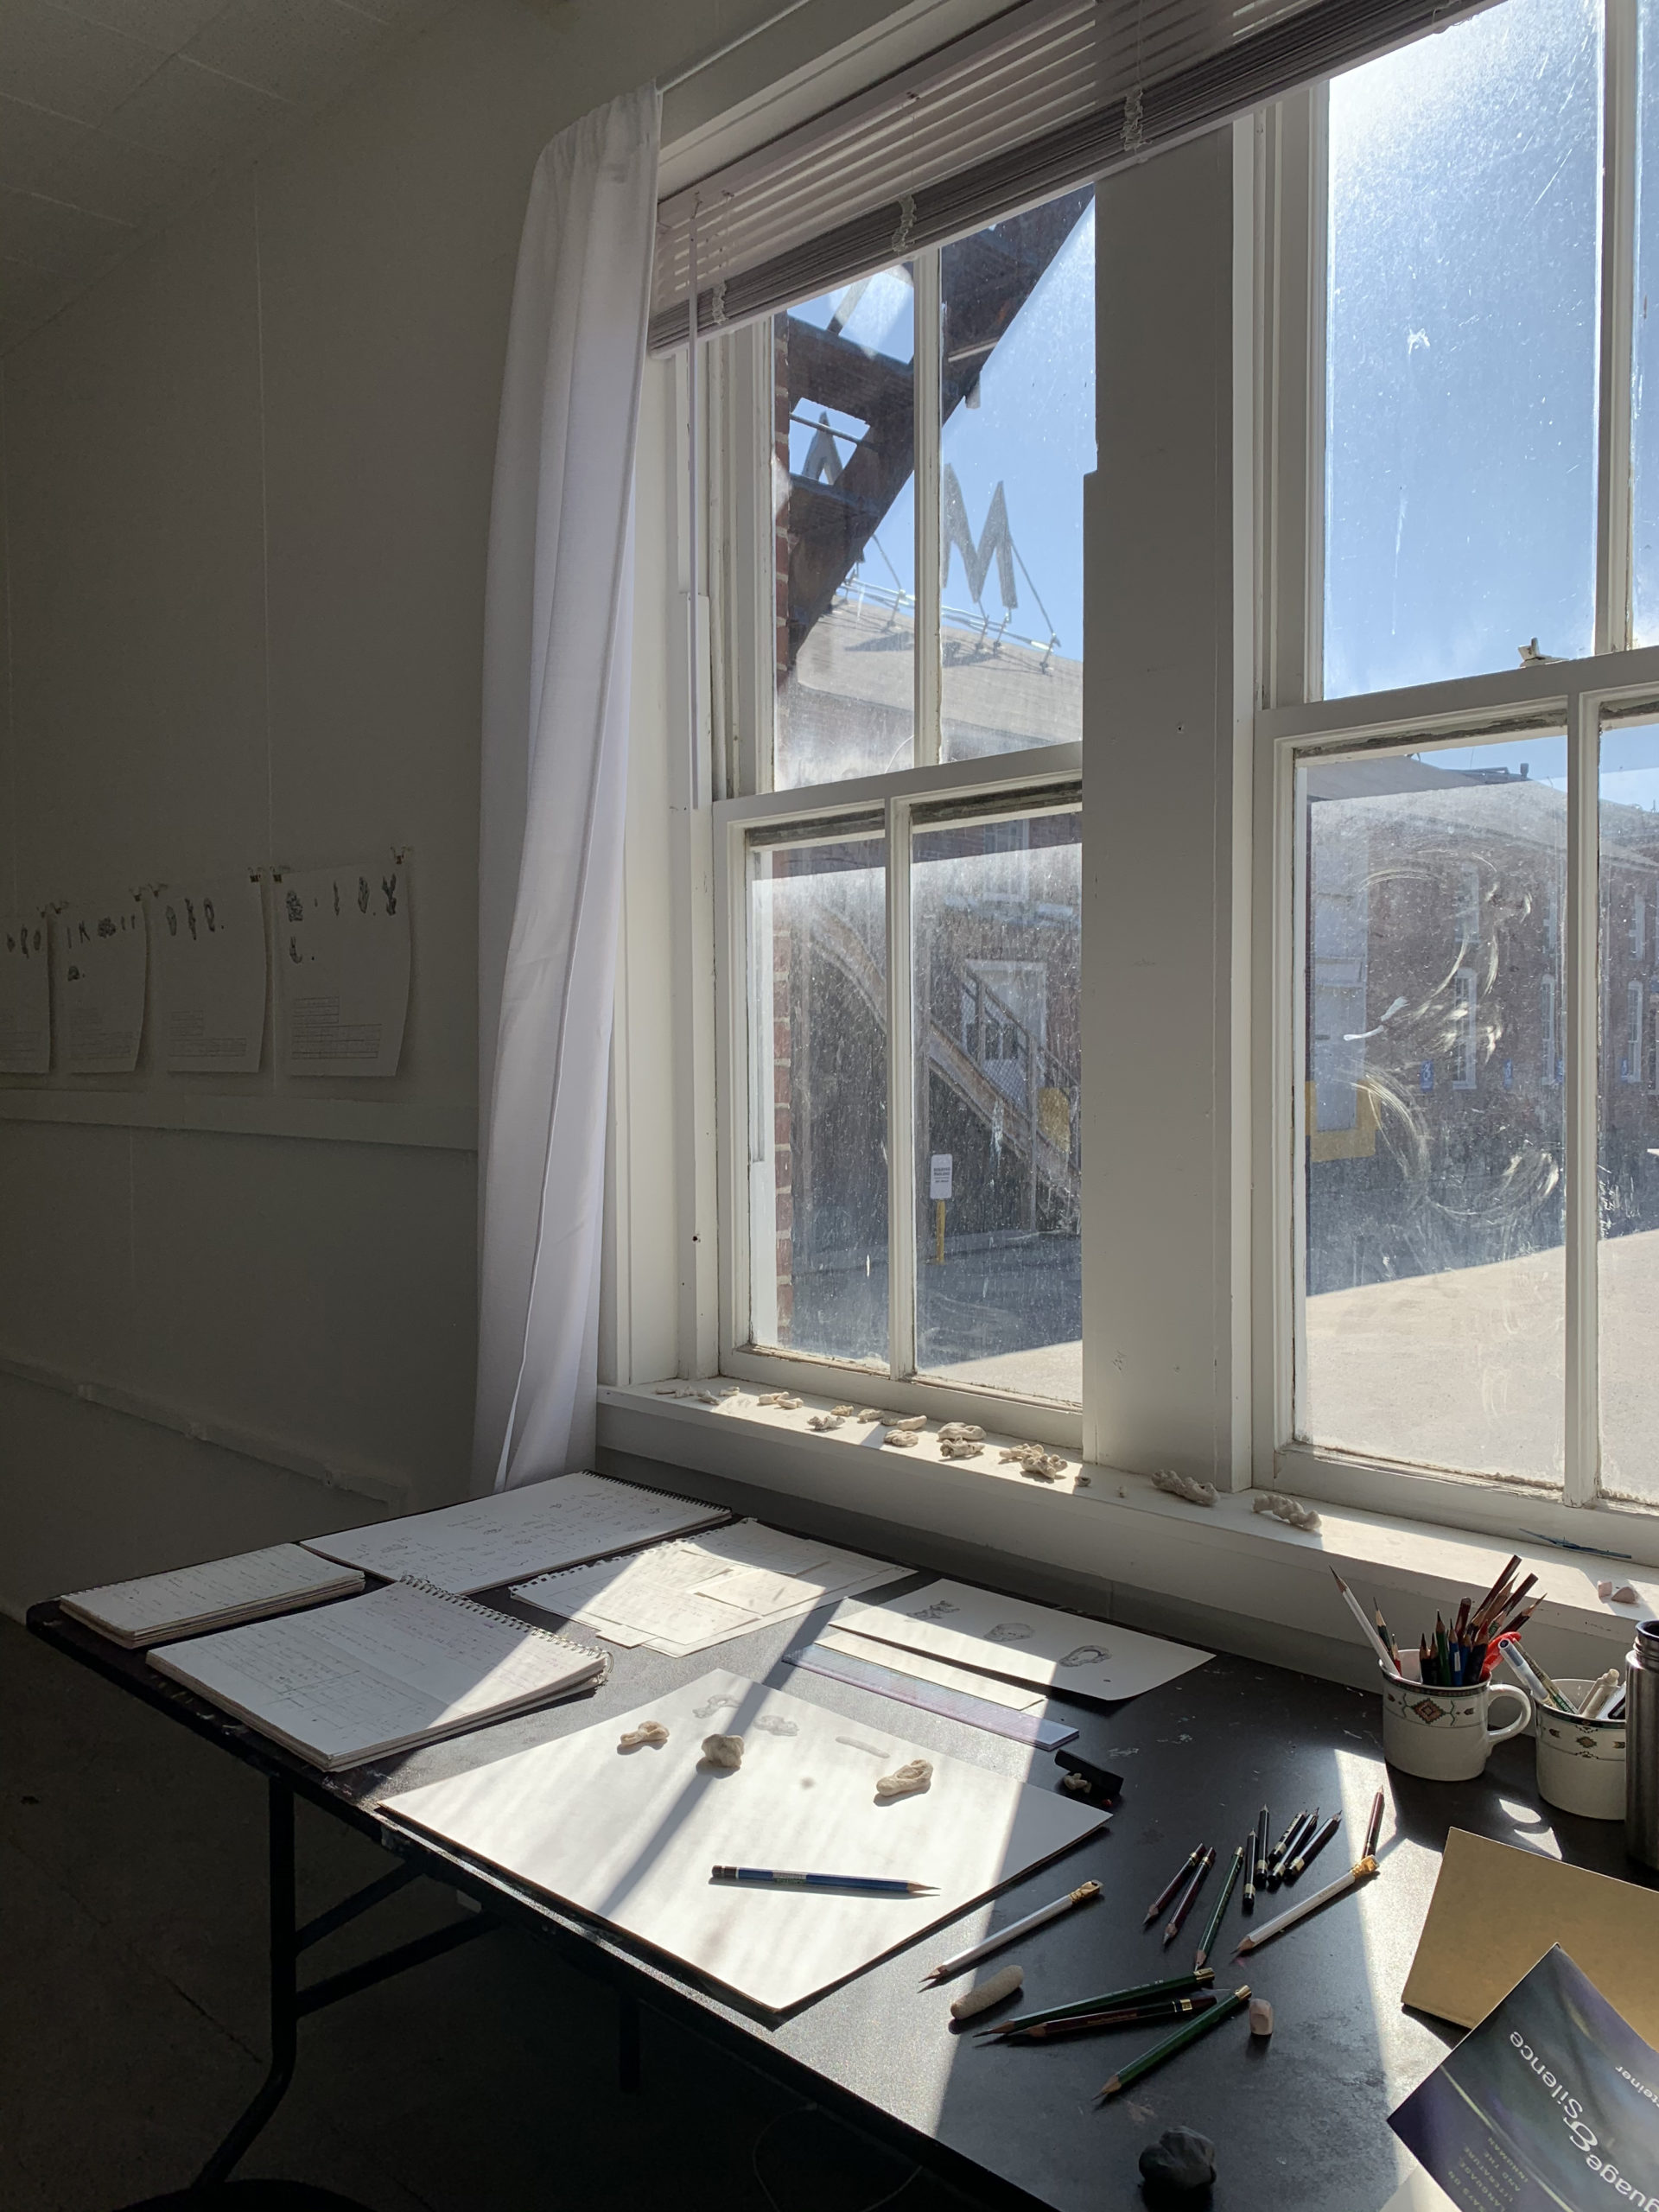 A view of the inside of a studio: a desk with papers and drawing utensils, a window with a view of daylight outside, and three papers hanging on a nearby wall.